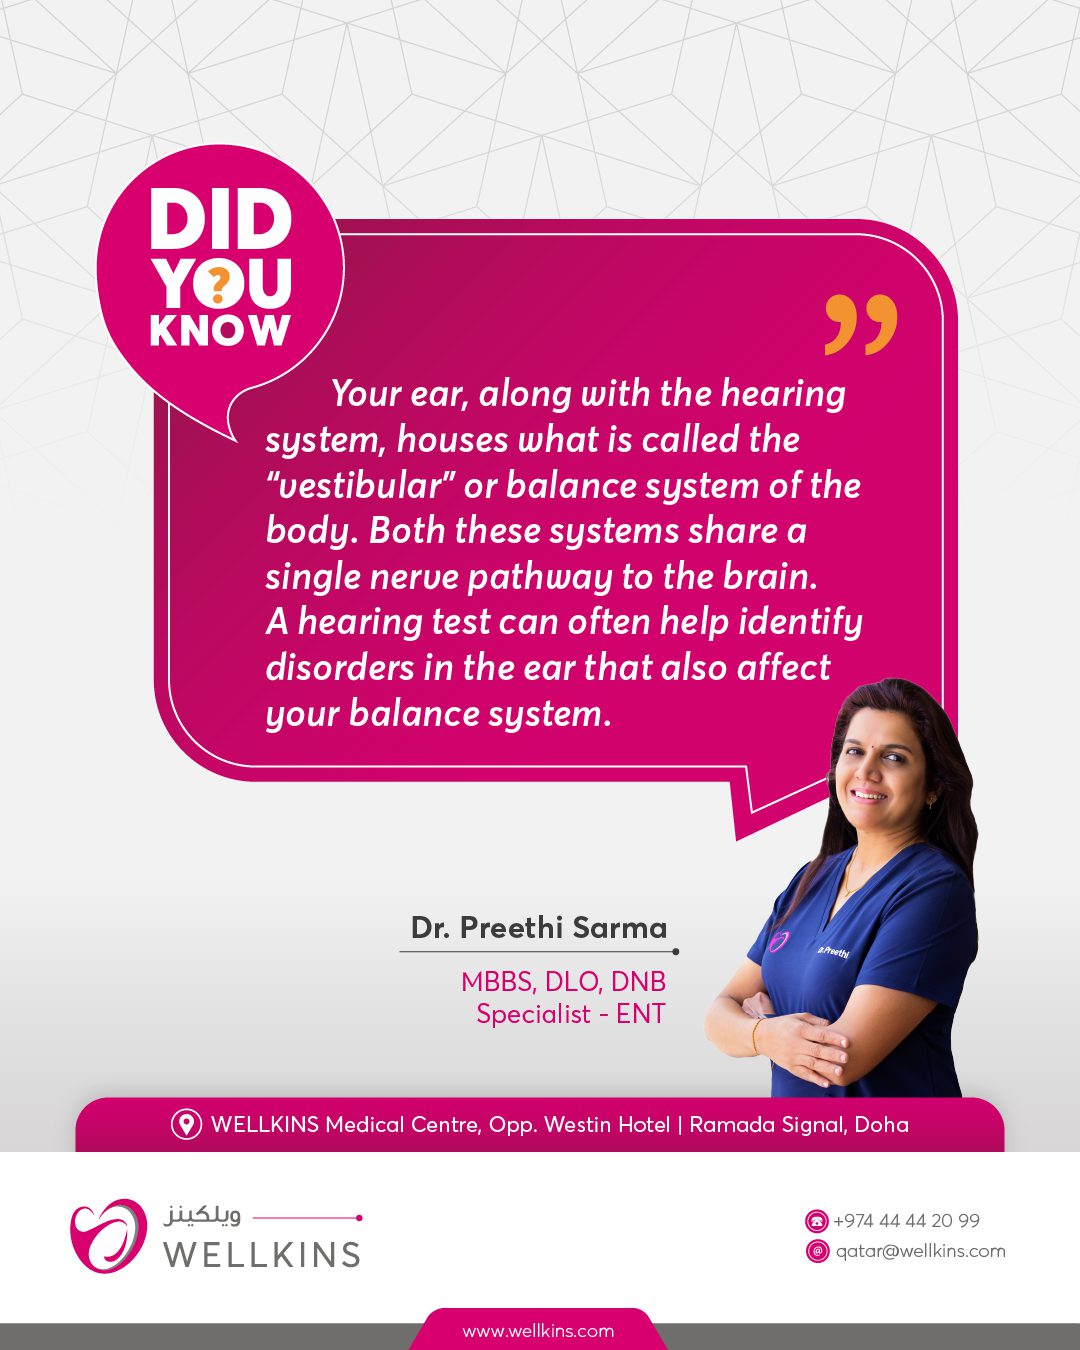 #DidYouKnow''Your ear, along with the hearing system, houses what is called the “vestibular” or balance system of the body. Both these systems share a single nerve pathway to the brain. A hearing test can often help identify disorders in the ear that also affect your balance system.''- Dr.Preethi Sarma(Specialist ENT)_______________________________
To learn more about #WELLKINSQATAR and our services, kindly visit our website www.wellkins.com
Helpline: 4444 2099
_______________________________
#Wellkinsqatar #wellkins #medicalcentre #Qatar2022